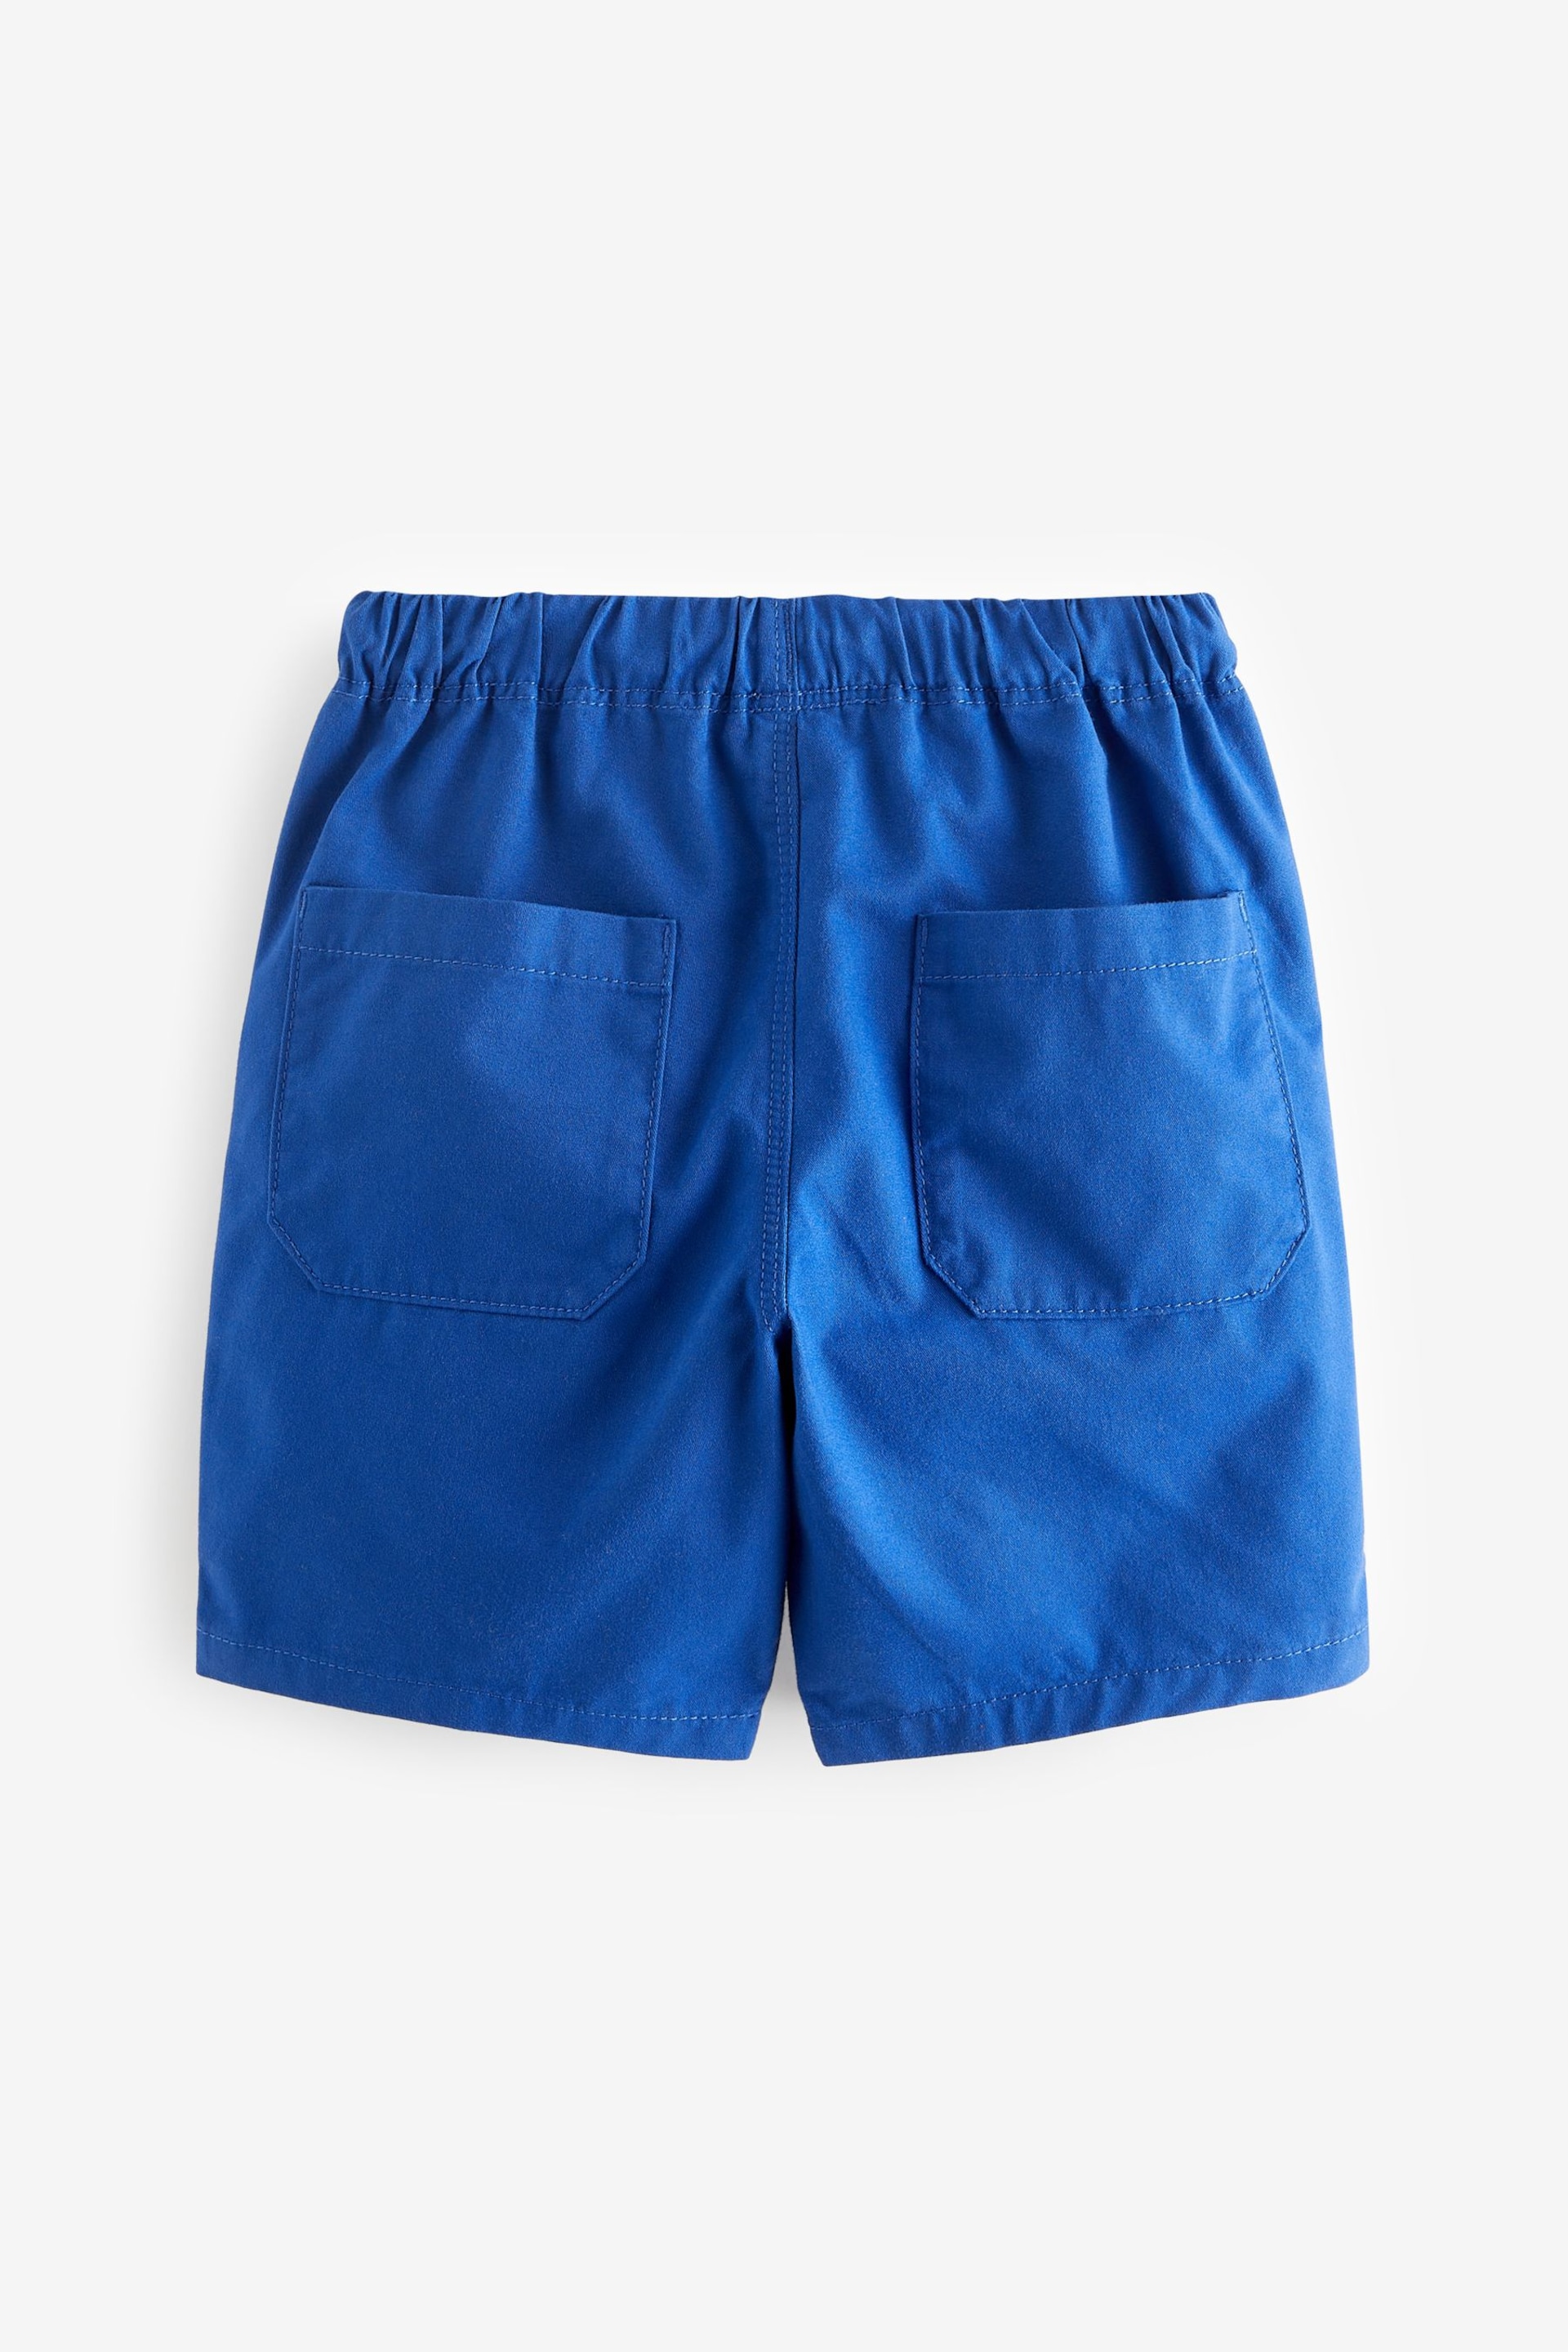 Cobalt Blue Single Pull-On Shorts (3-16yrs) - Image 2 of 3